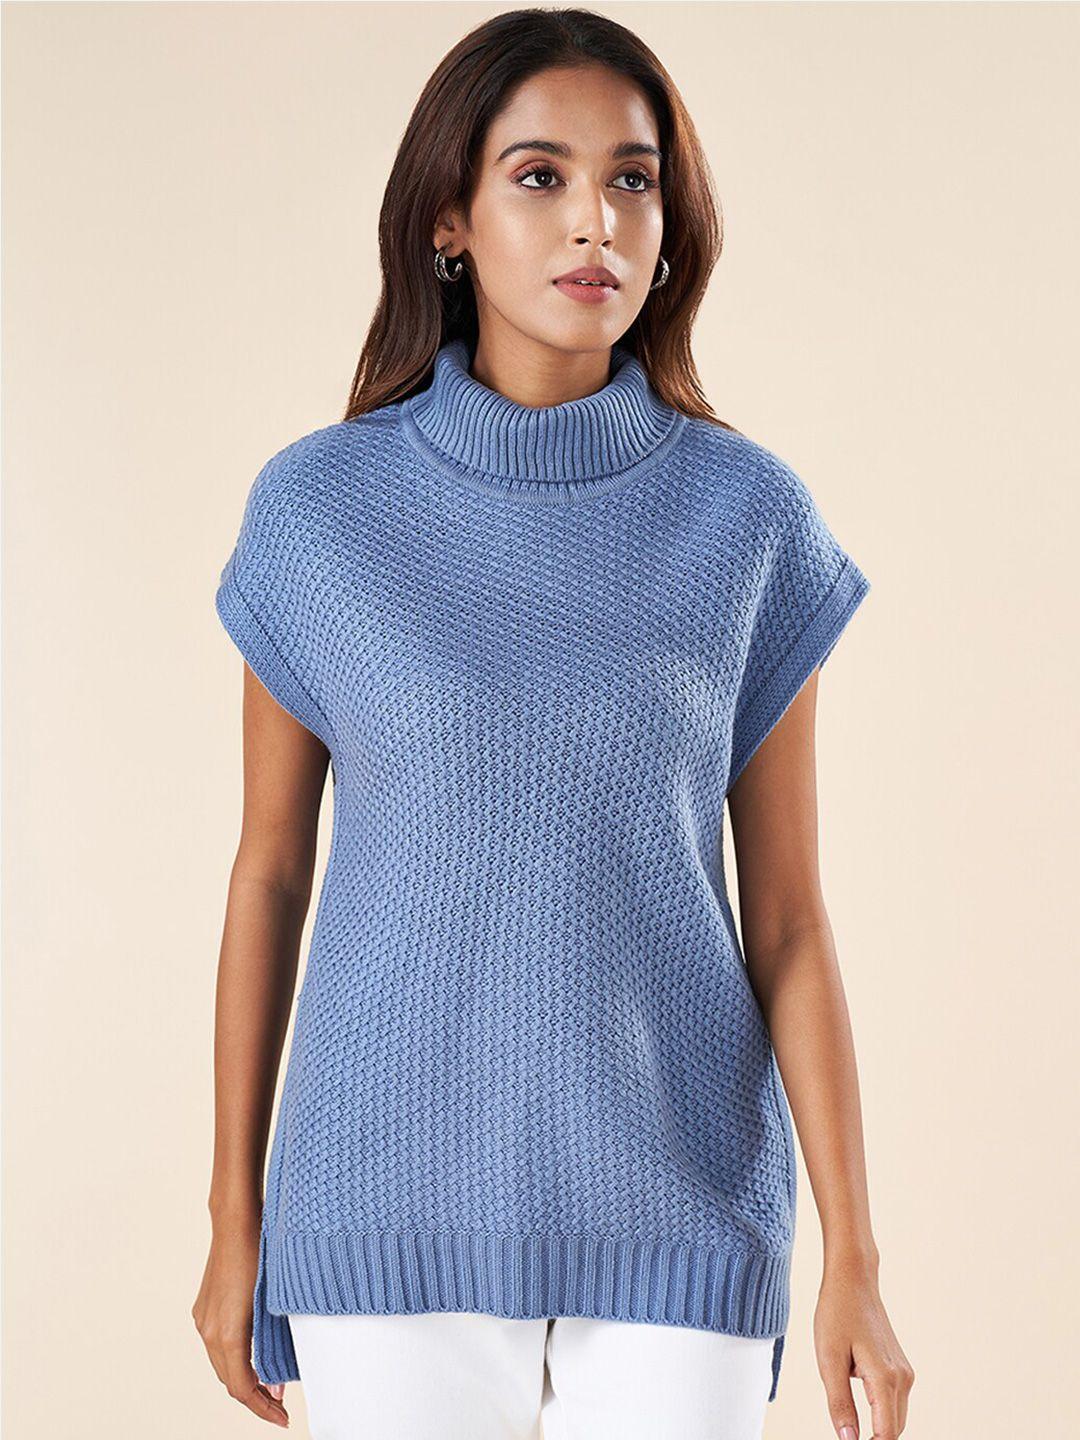 akkriti by pantaloons cable knit turtle neck sweater vest